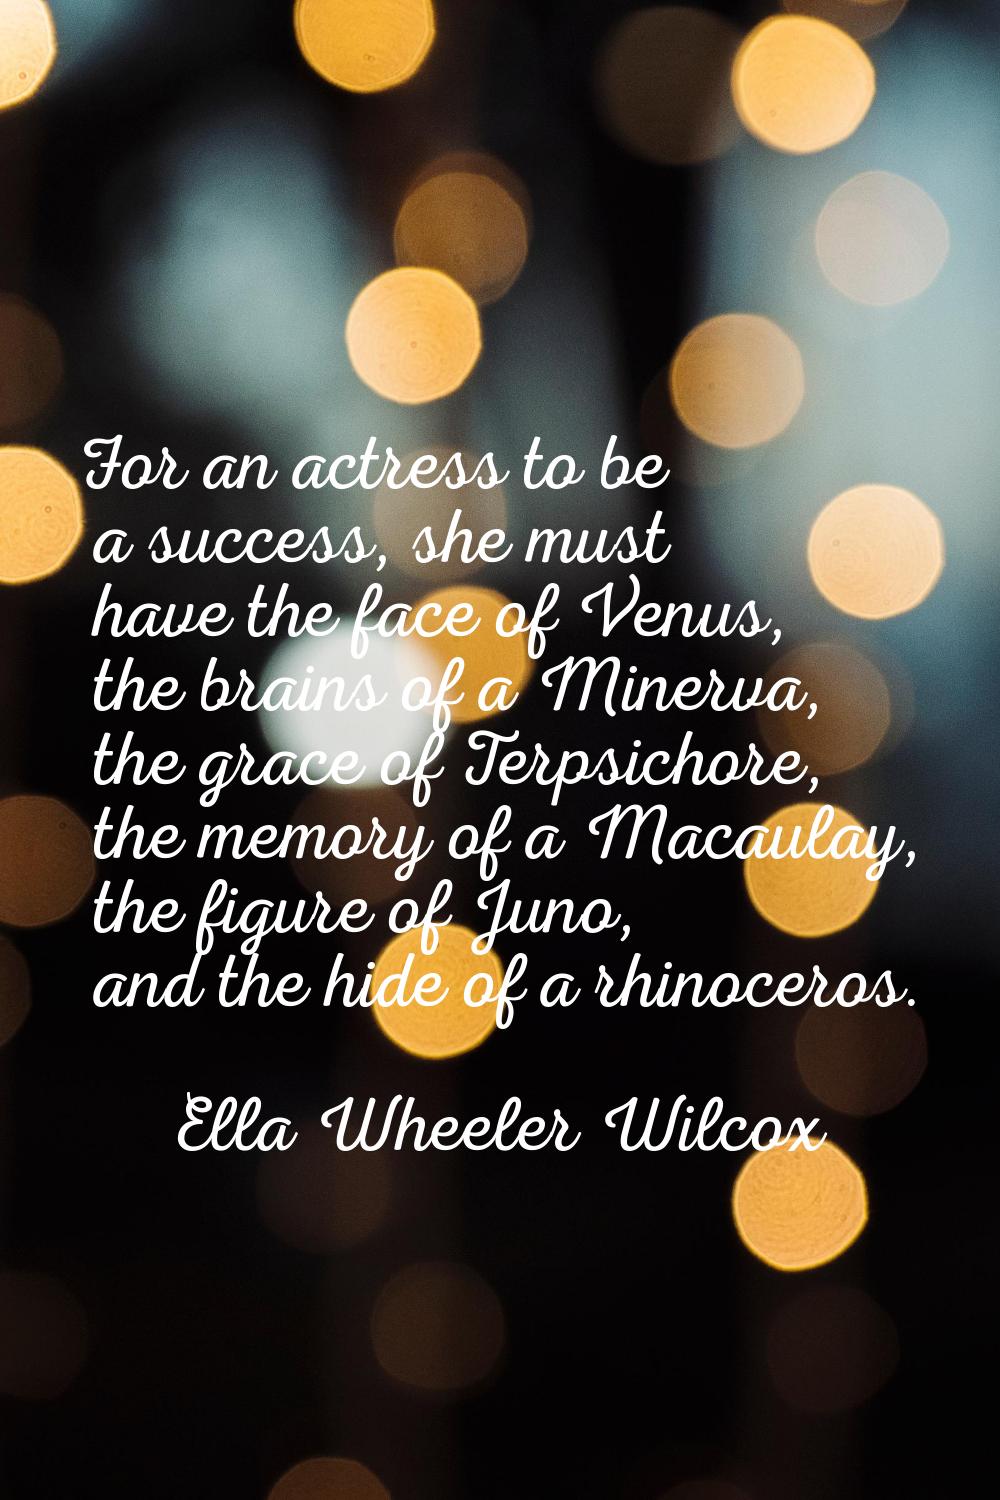 For an actress to be a success, she must have the face of Venus, the brains of a Minerva, the grace